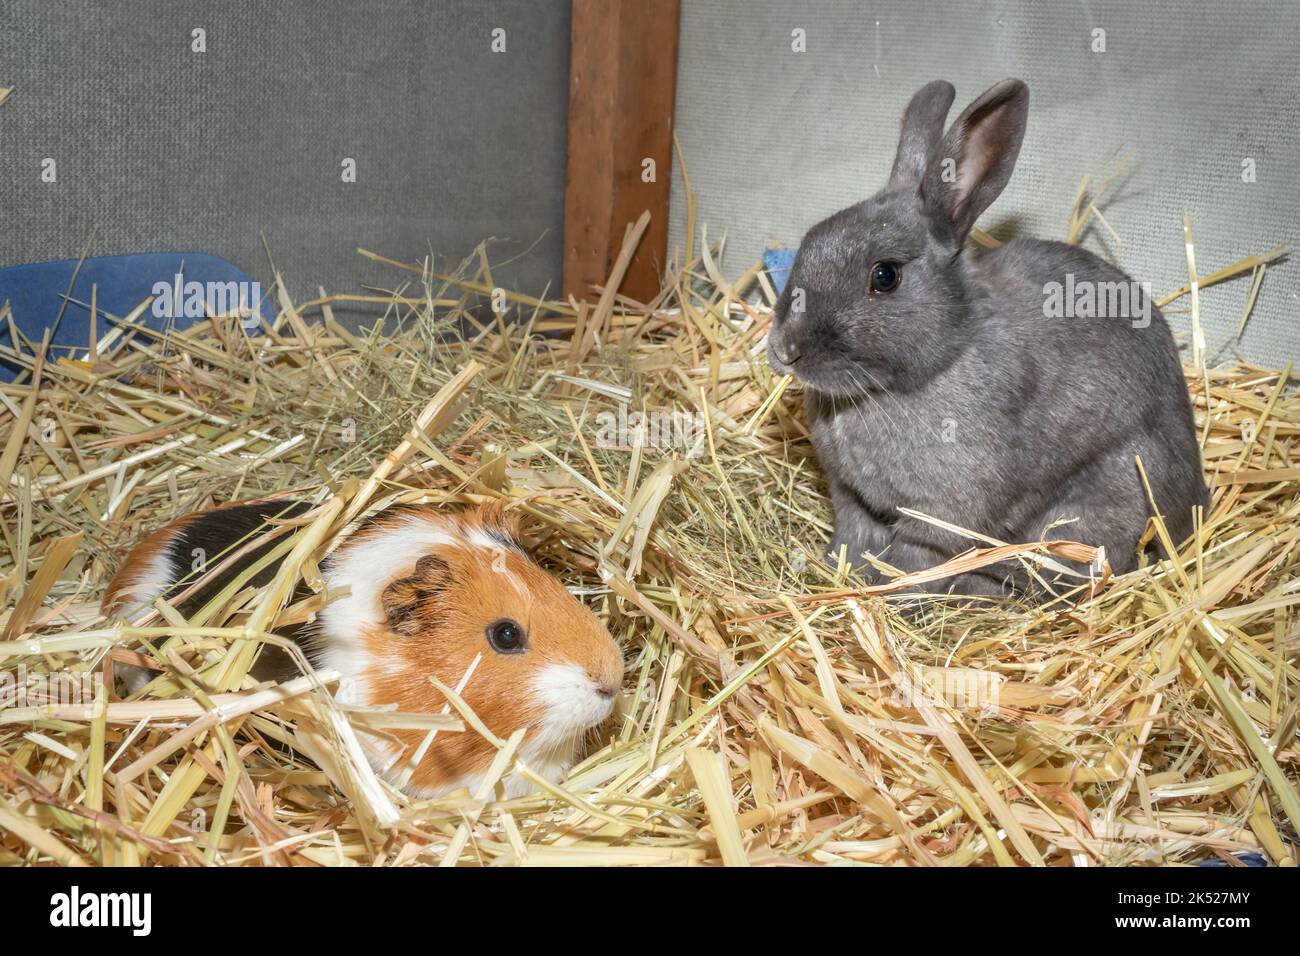 Domestic sheltie guinea pig (Cavia porcellus) with a Grey pet rabbit, Cape Town, South Africa Stock Photo